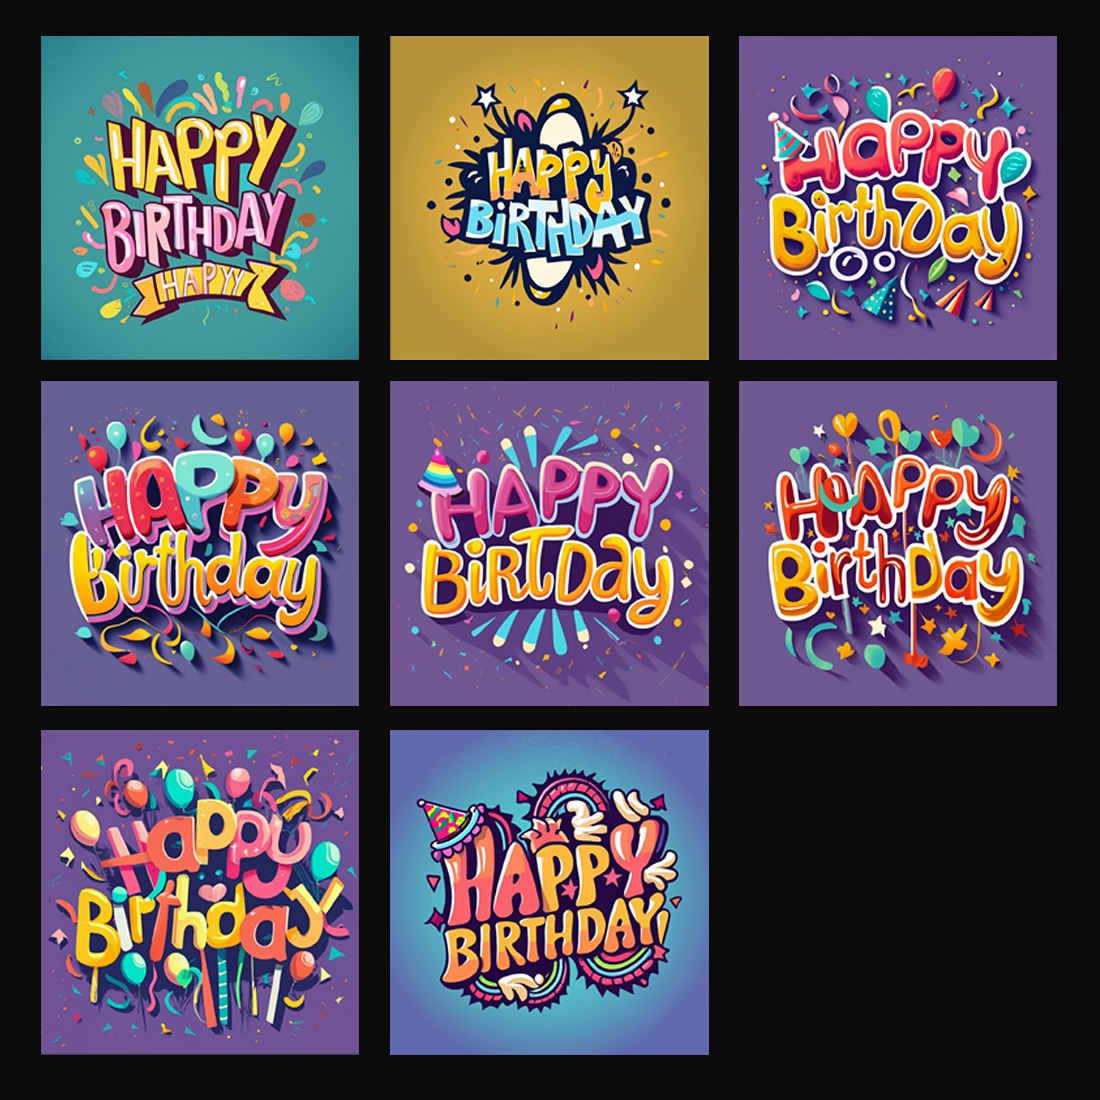 Happy Birthday Text Design Template Total = 08 cover image.